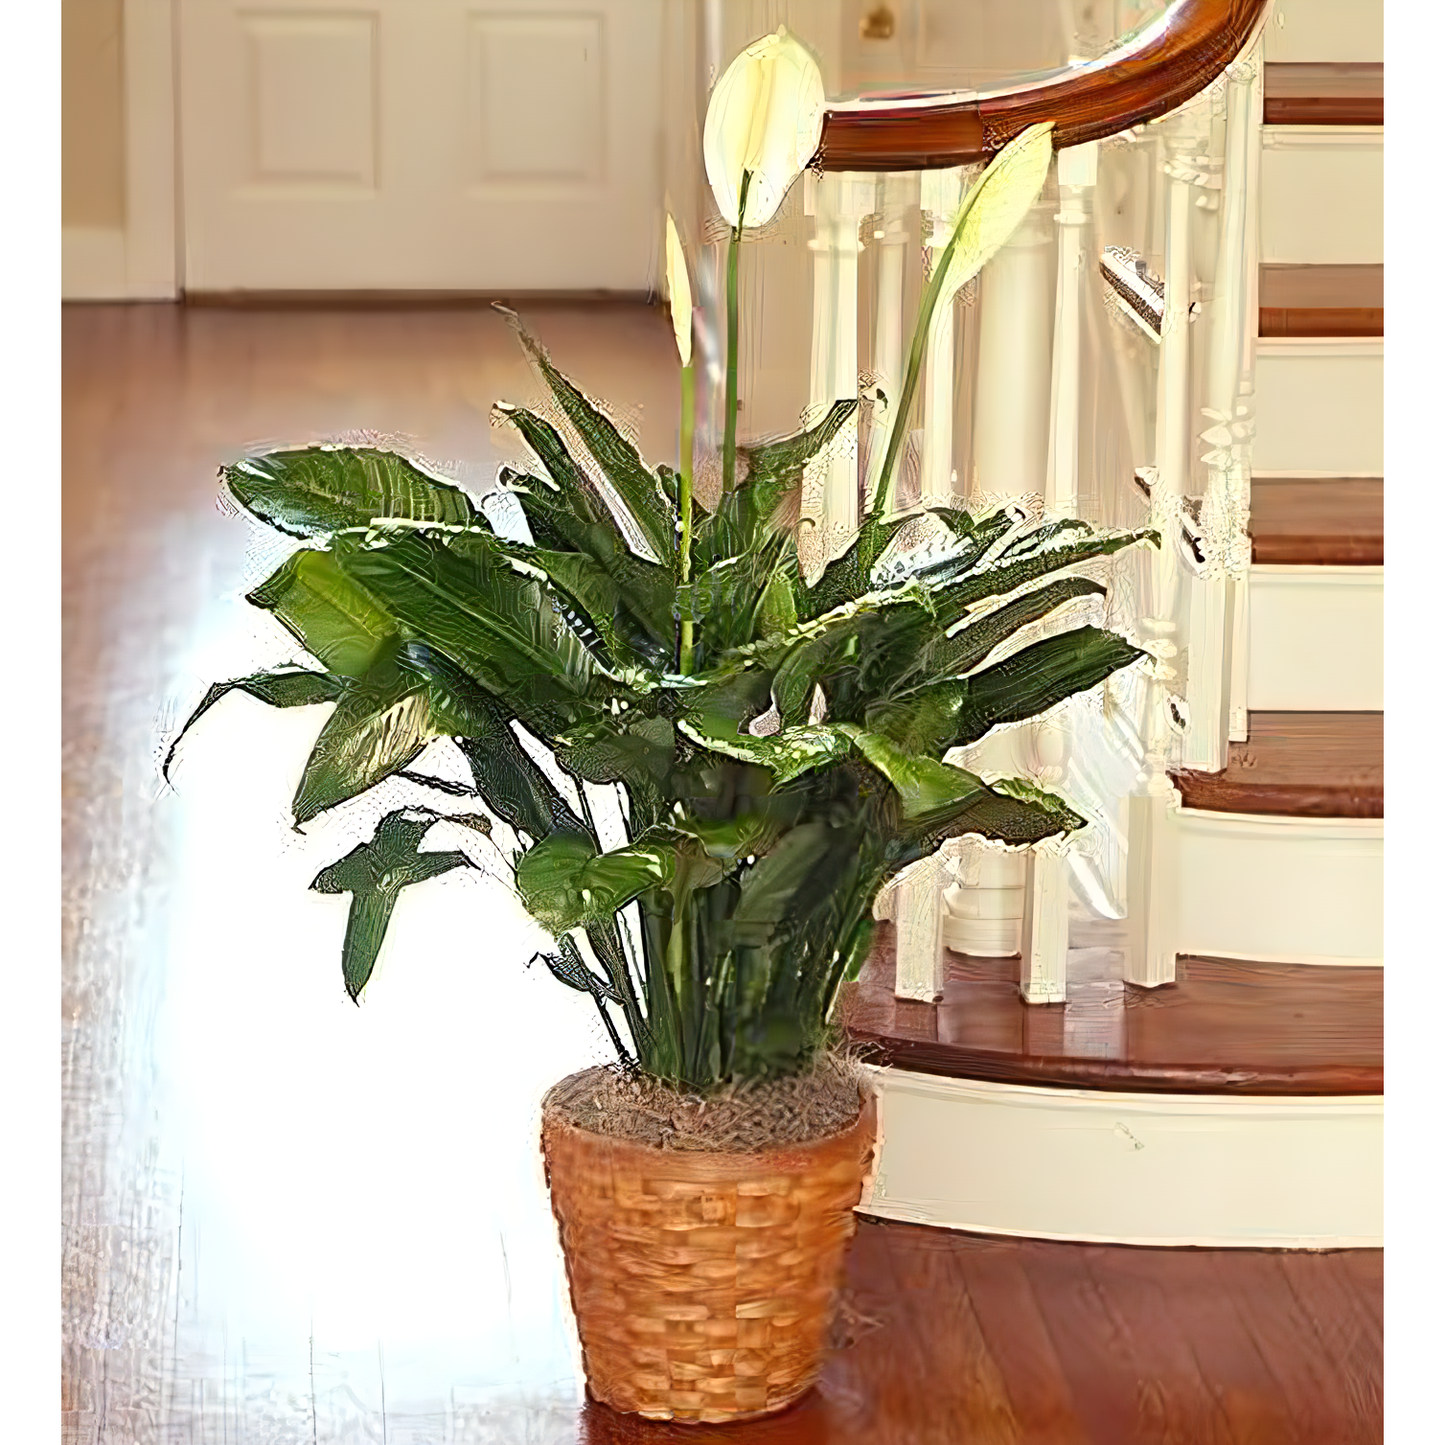 NYC Flower Delivery - Spathiphyllum Plant for Sympathy - Plants